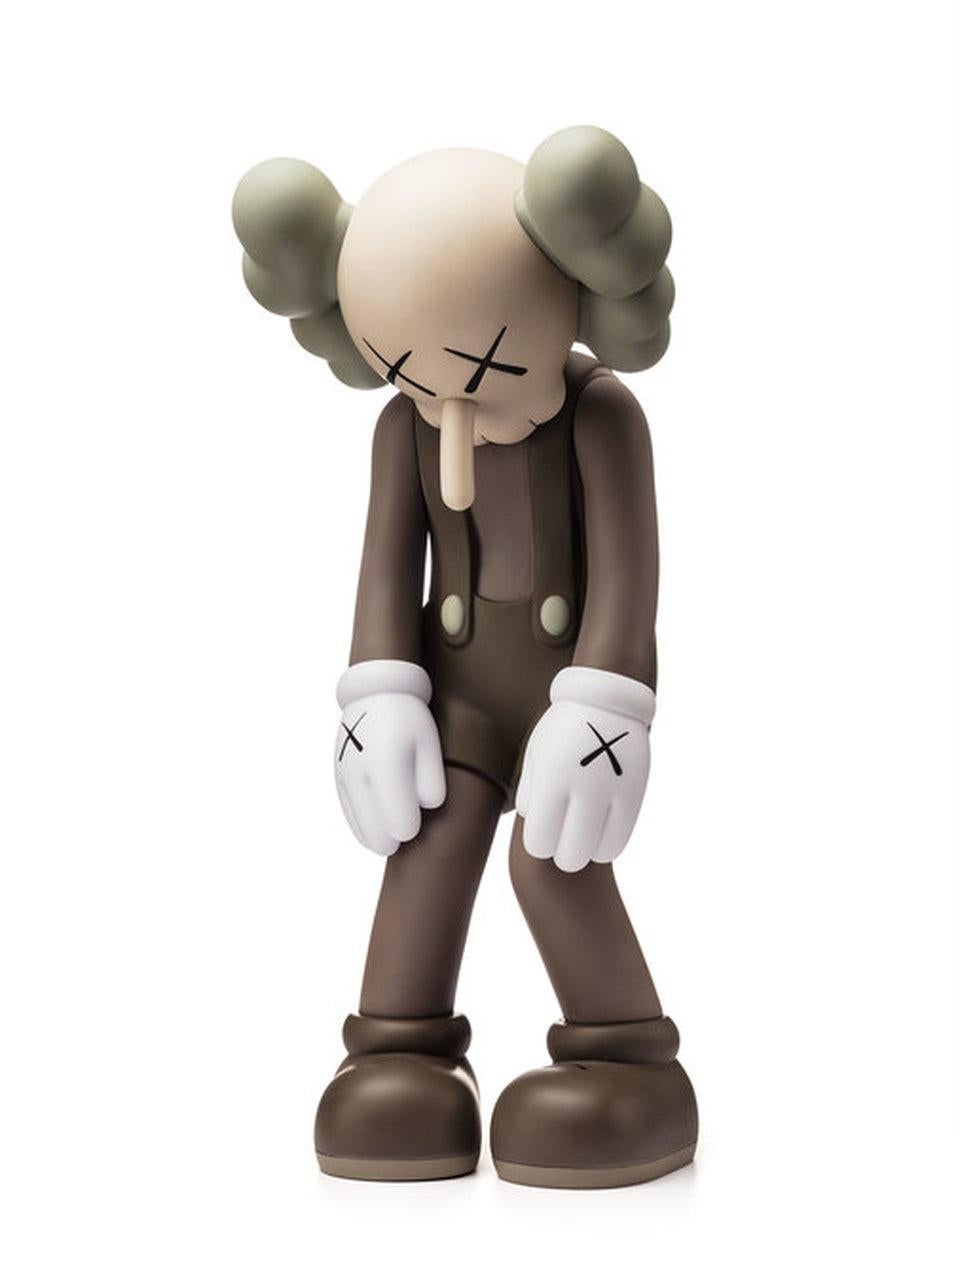 In December 2017, KAWS released a new version of his classic companion character, titled "Small Lie". The figure features the companion slumped over in what appears to be a disappointing stance, with a long nose that's reminiscent of Pinocchio. This